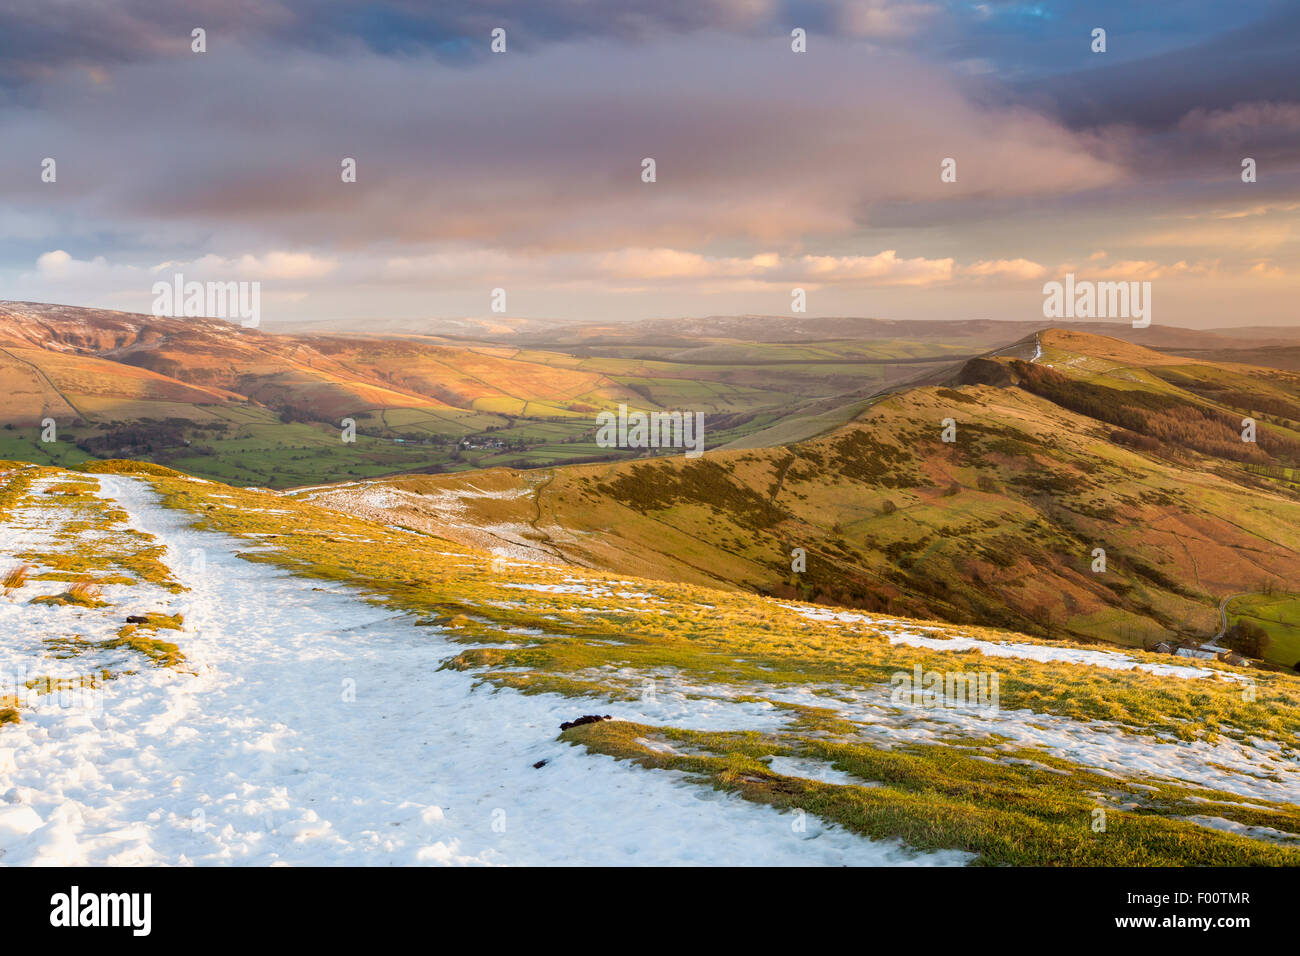 View over Hope Valley from Mam Tor, High Peak District, Peak District National Park, Castelton, Derbyshire, England, United King Stock Photo